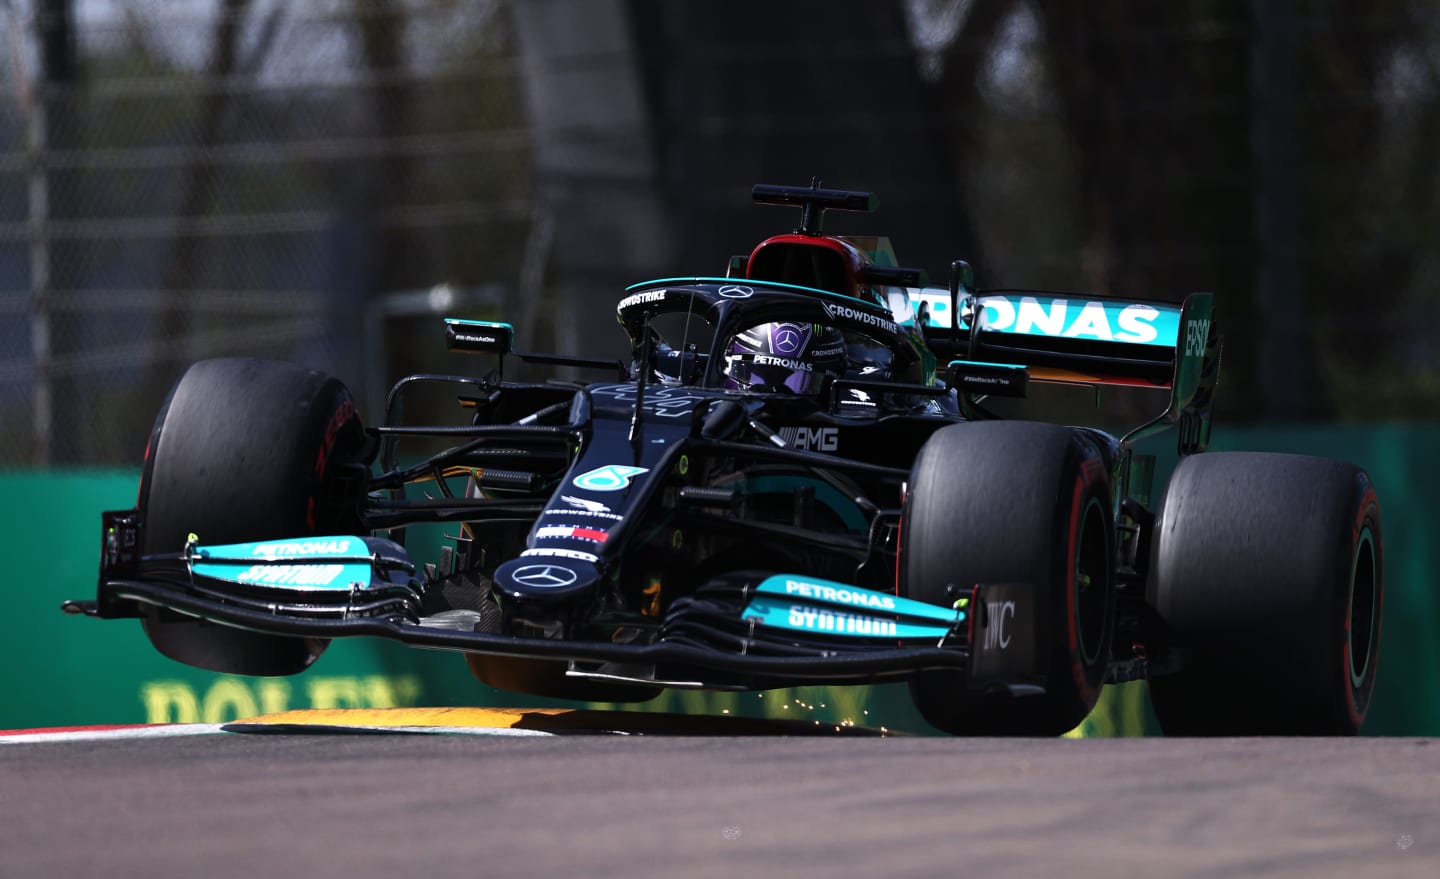 IMOLA, ITALY - APRIL 17: Lewis Hamilton of Great Britain driving the (44) Mercedes AMG Petronas F1